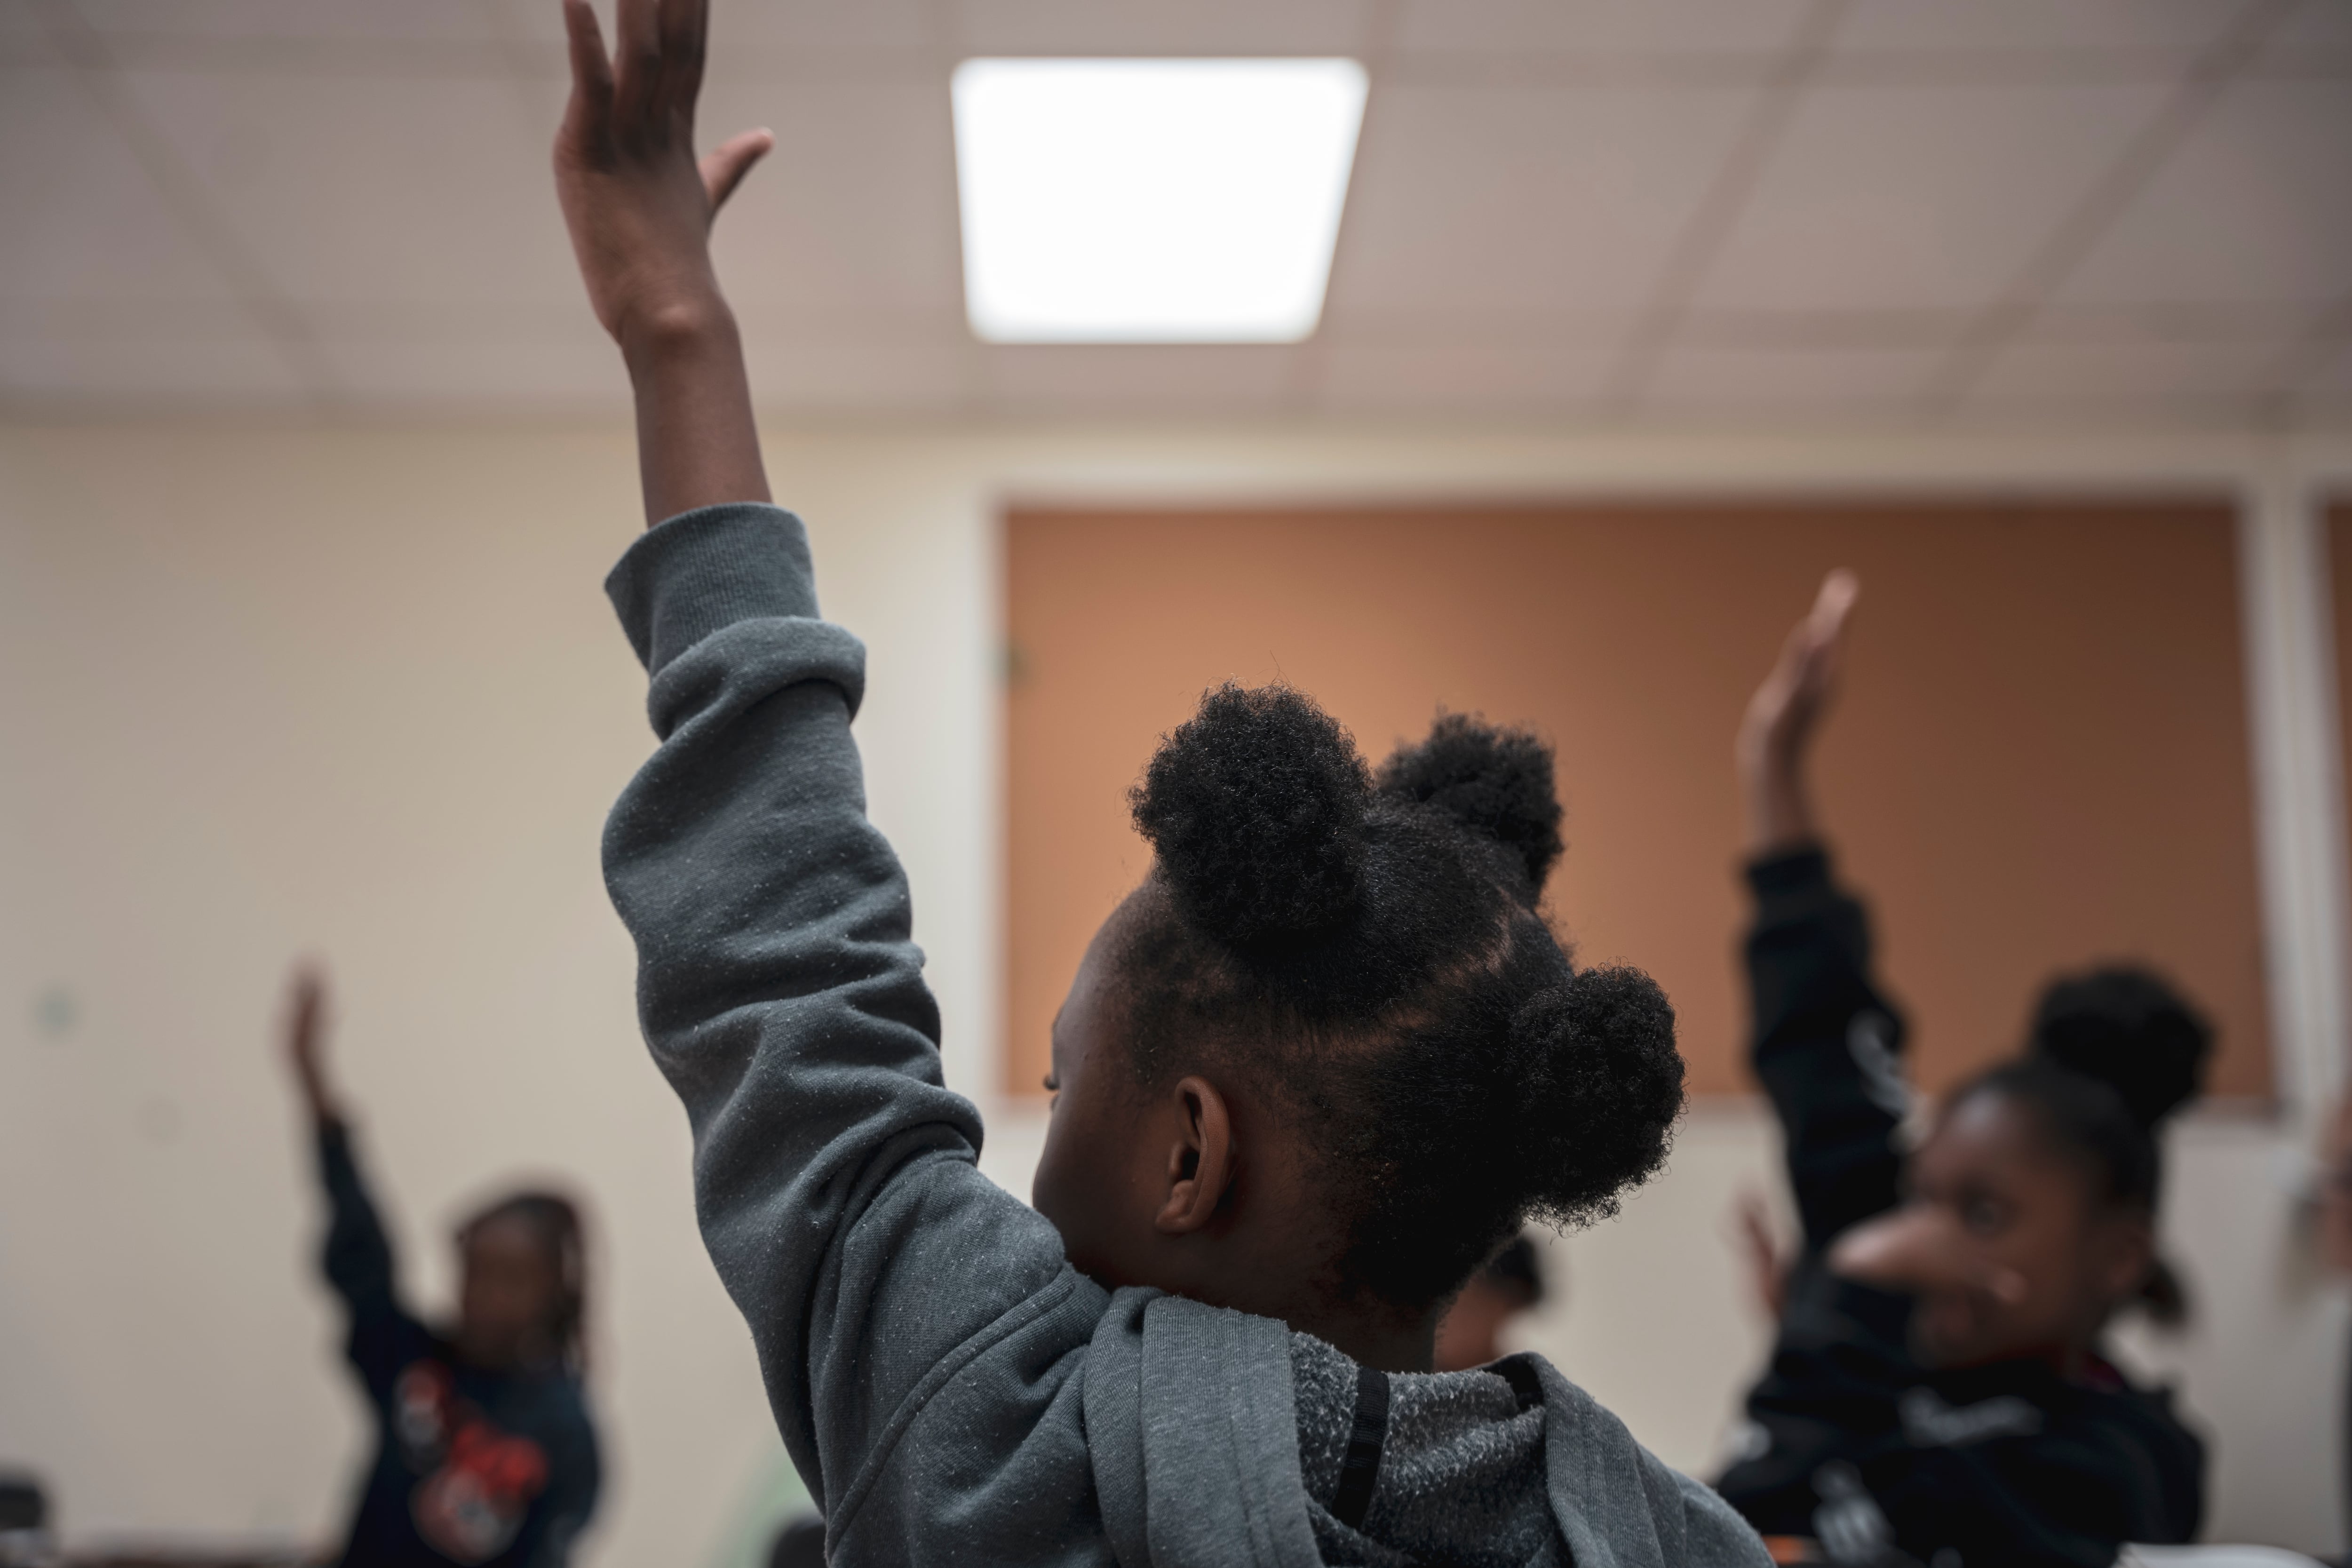 A young girl wearing a grey hoodie raises her hand during class.